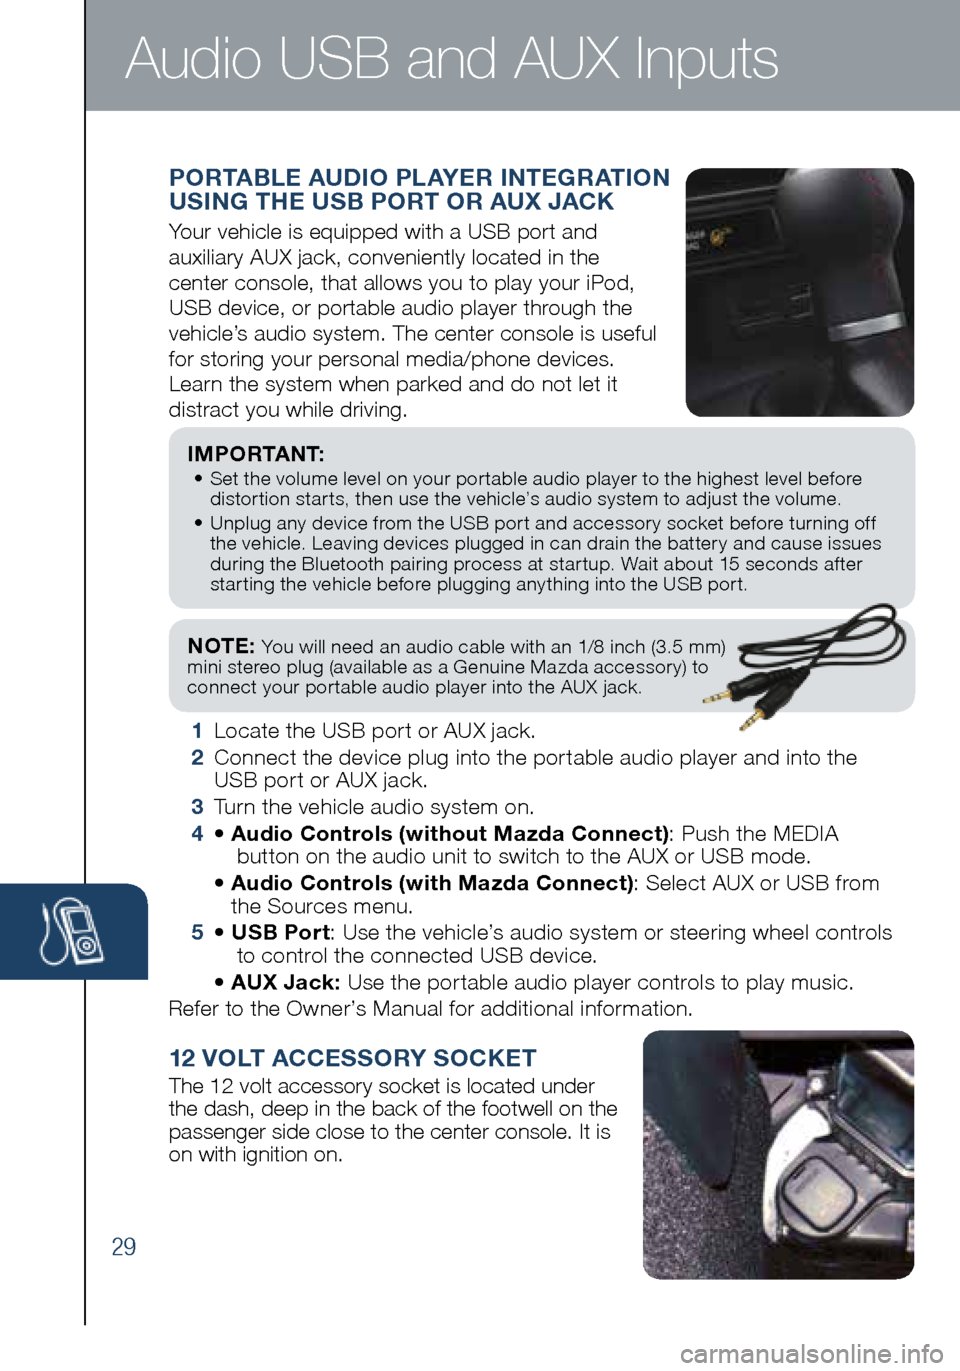 MAZDA MODEL MX-5 2016  Smart Start Guide (in English) 29
NOTE: You will need an audio cable with an 1/8 inch (3.5 mm)  
mini stereo plug (available as a Genuine Mazda accessory) to   
connect your portable audio player into the AUX  jack. 
I M P O R TA N